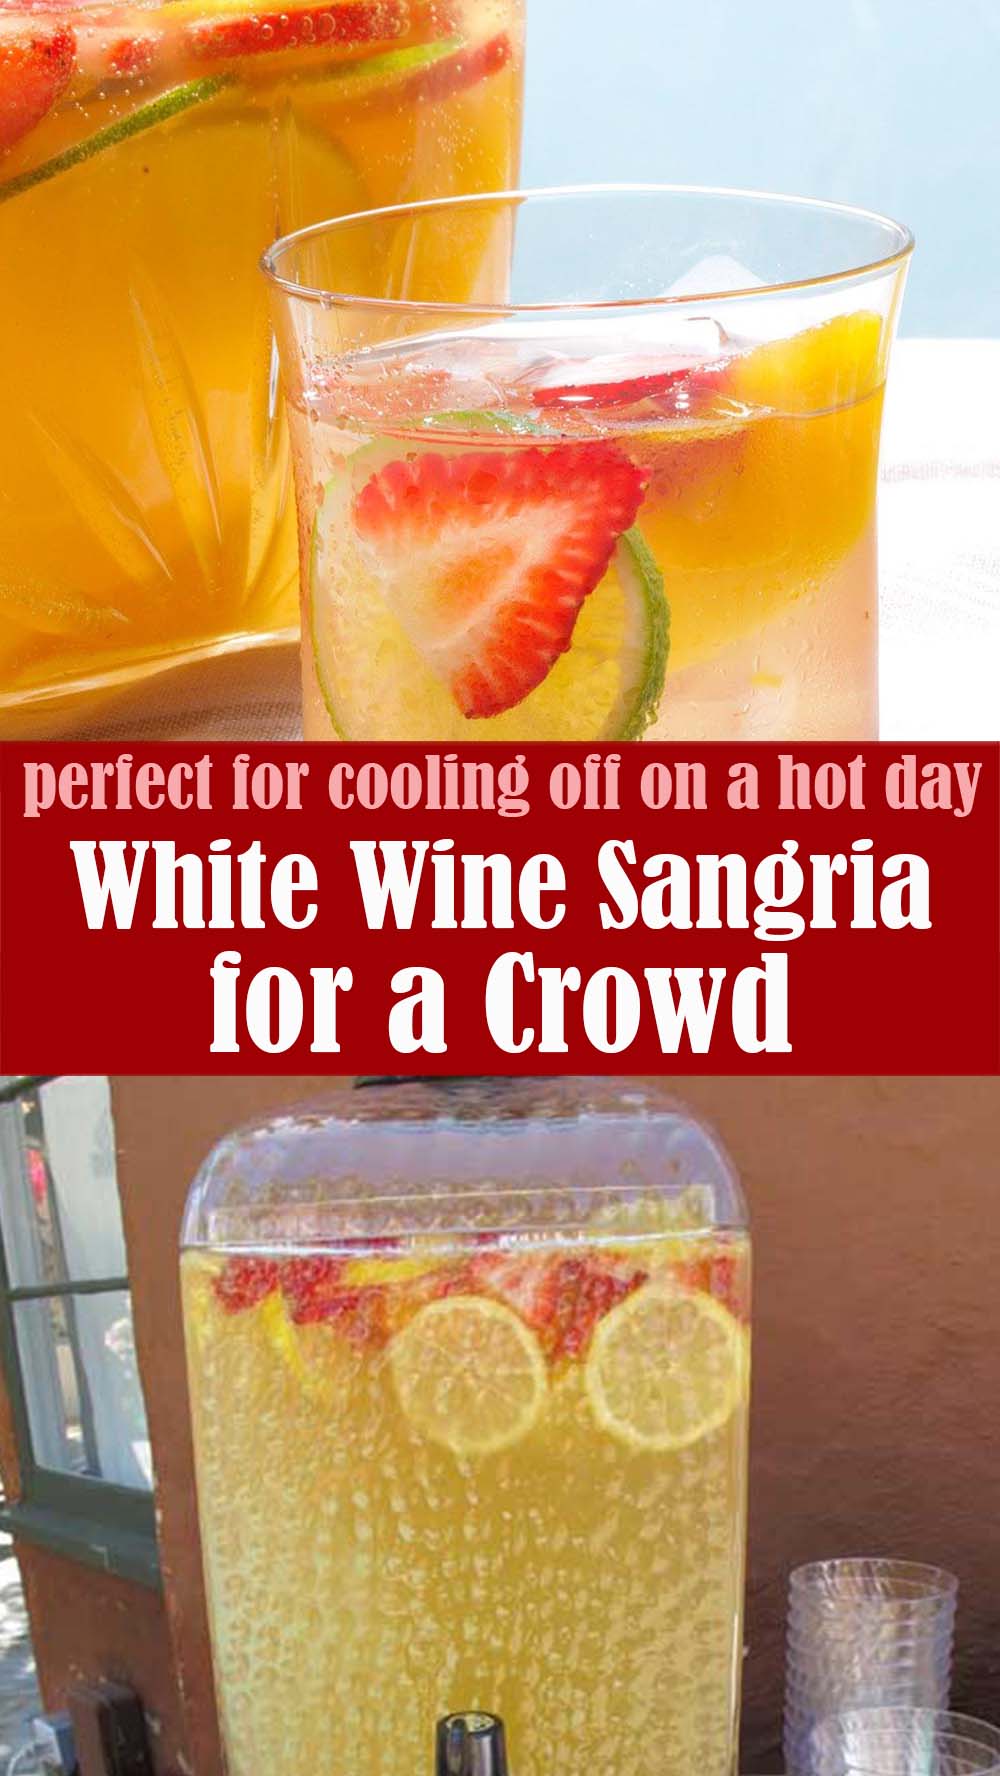 White Wine Sangria for a Crowd